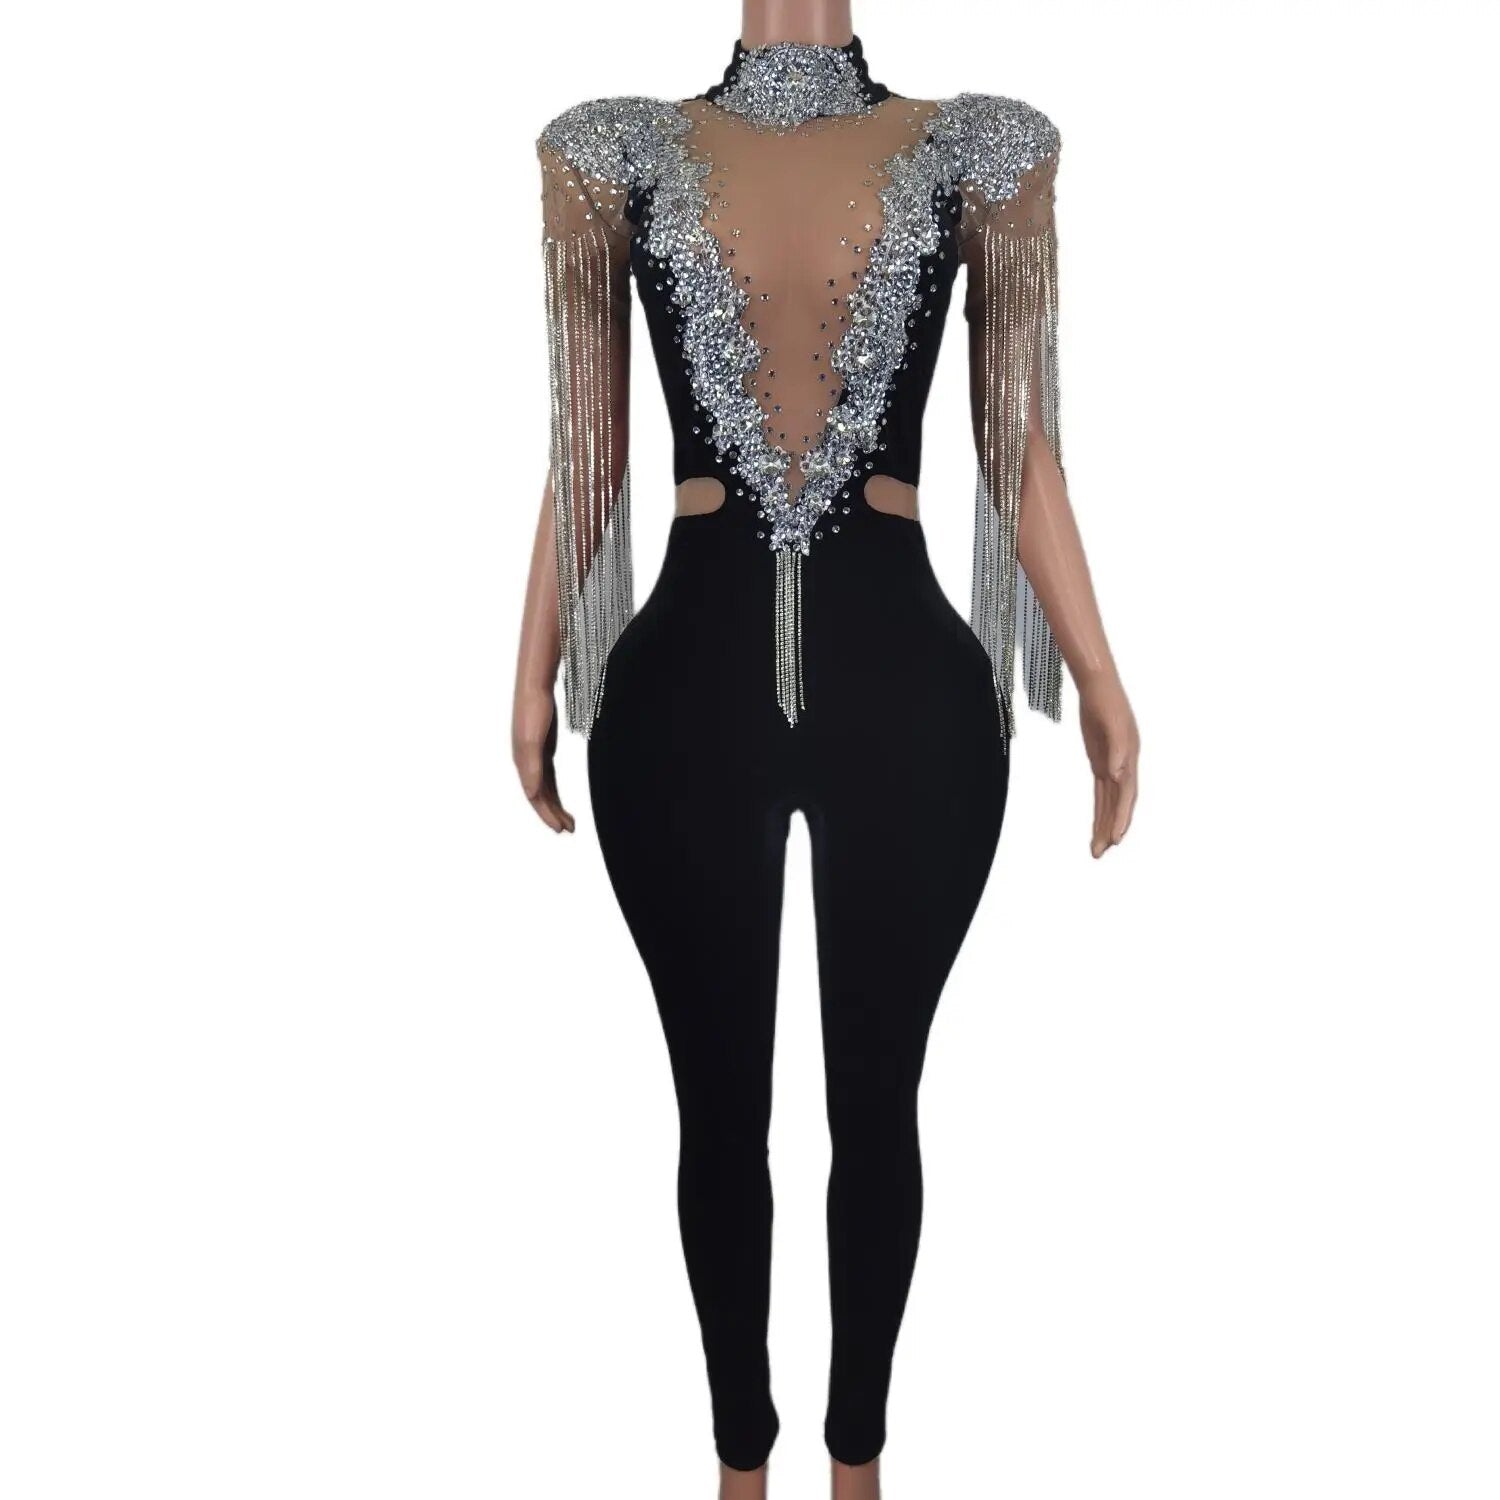 Sparkly Rhinestones Chain Stretch Velvet Jumpsuit Evening Birthday Celebrate Bodysuit Outfit Crystal Stage Sexy Costume 